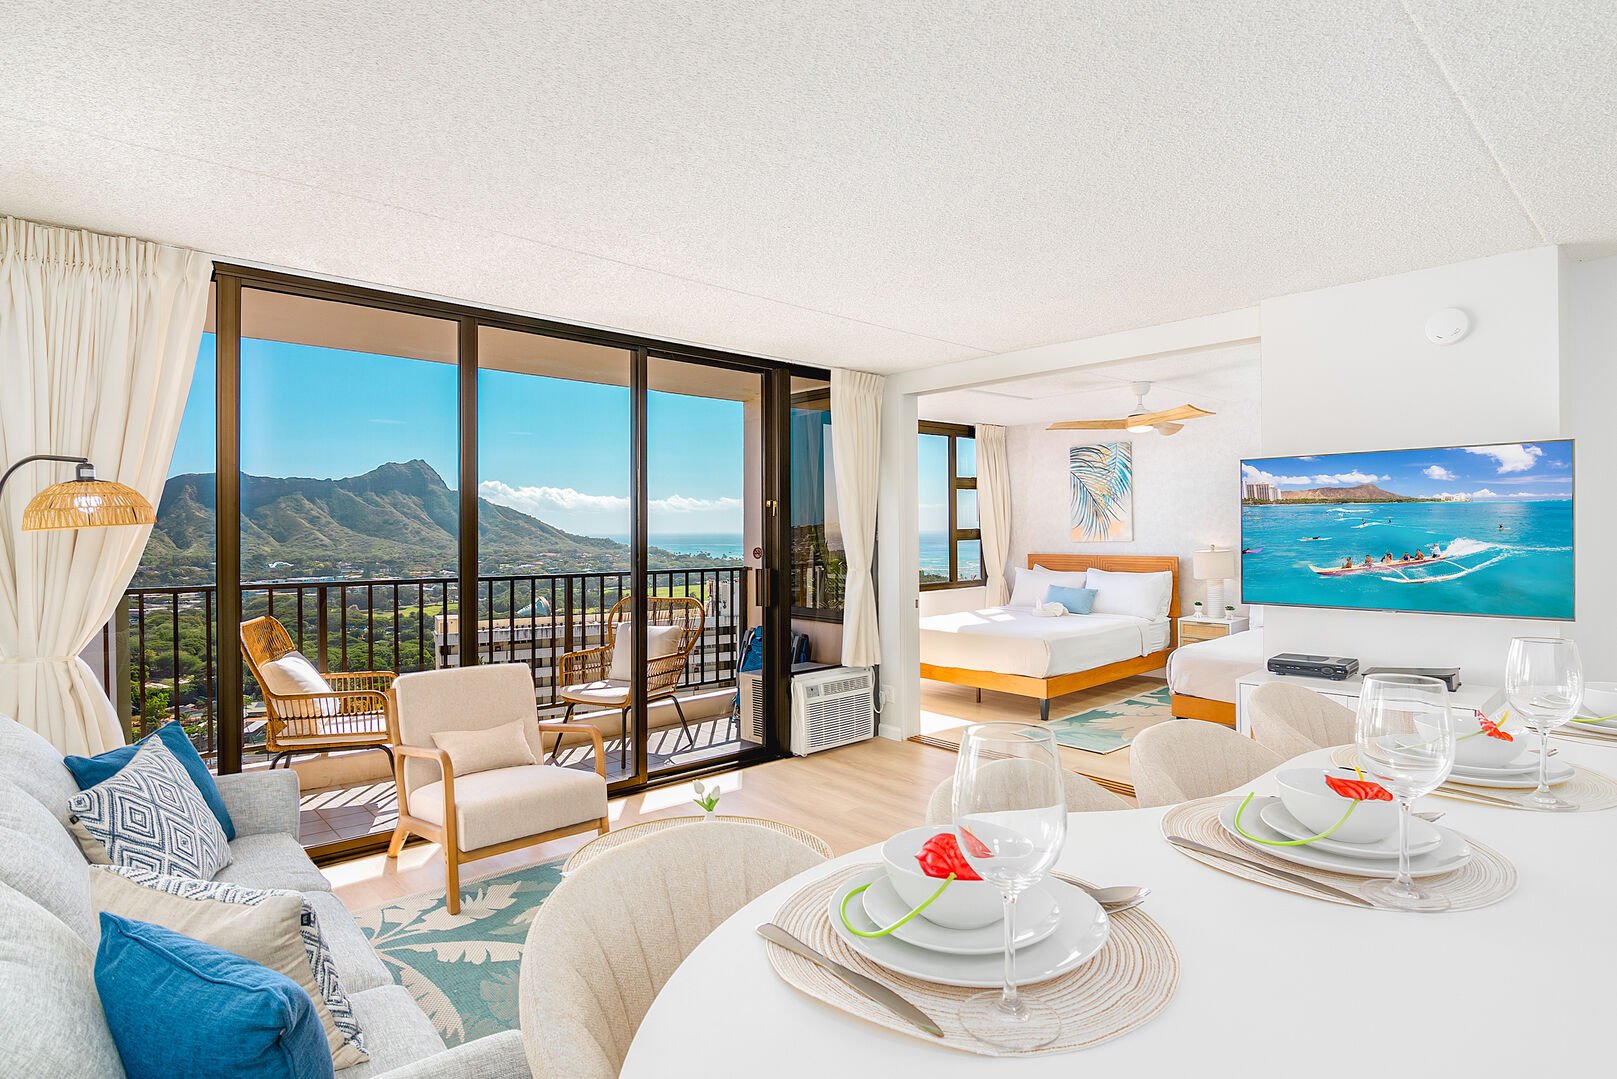 Enjoy your stay in this beautiful condo with stunning Diamond head and ocean views!